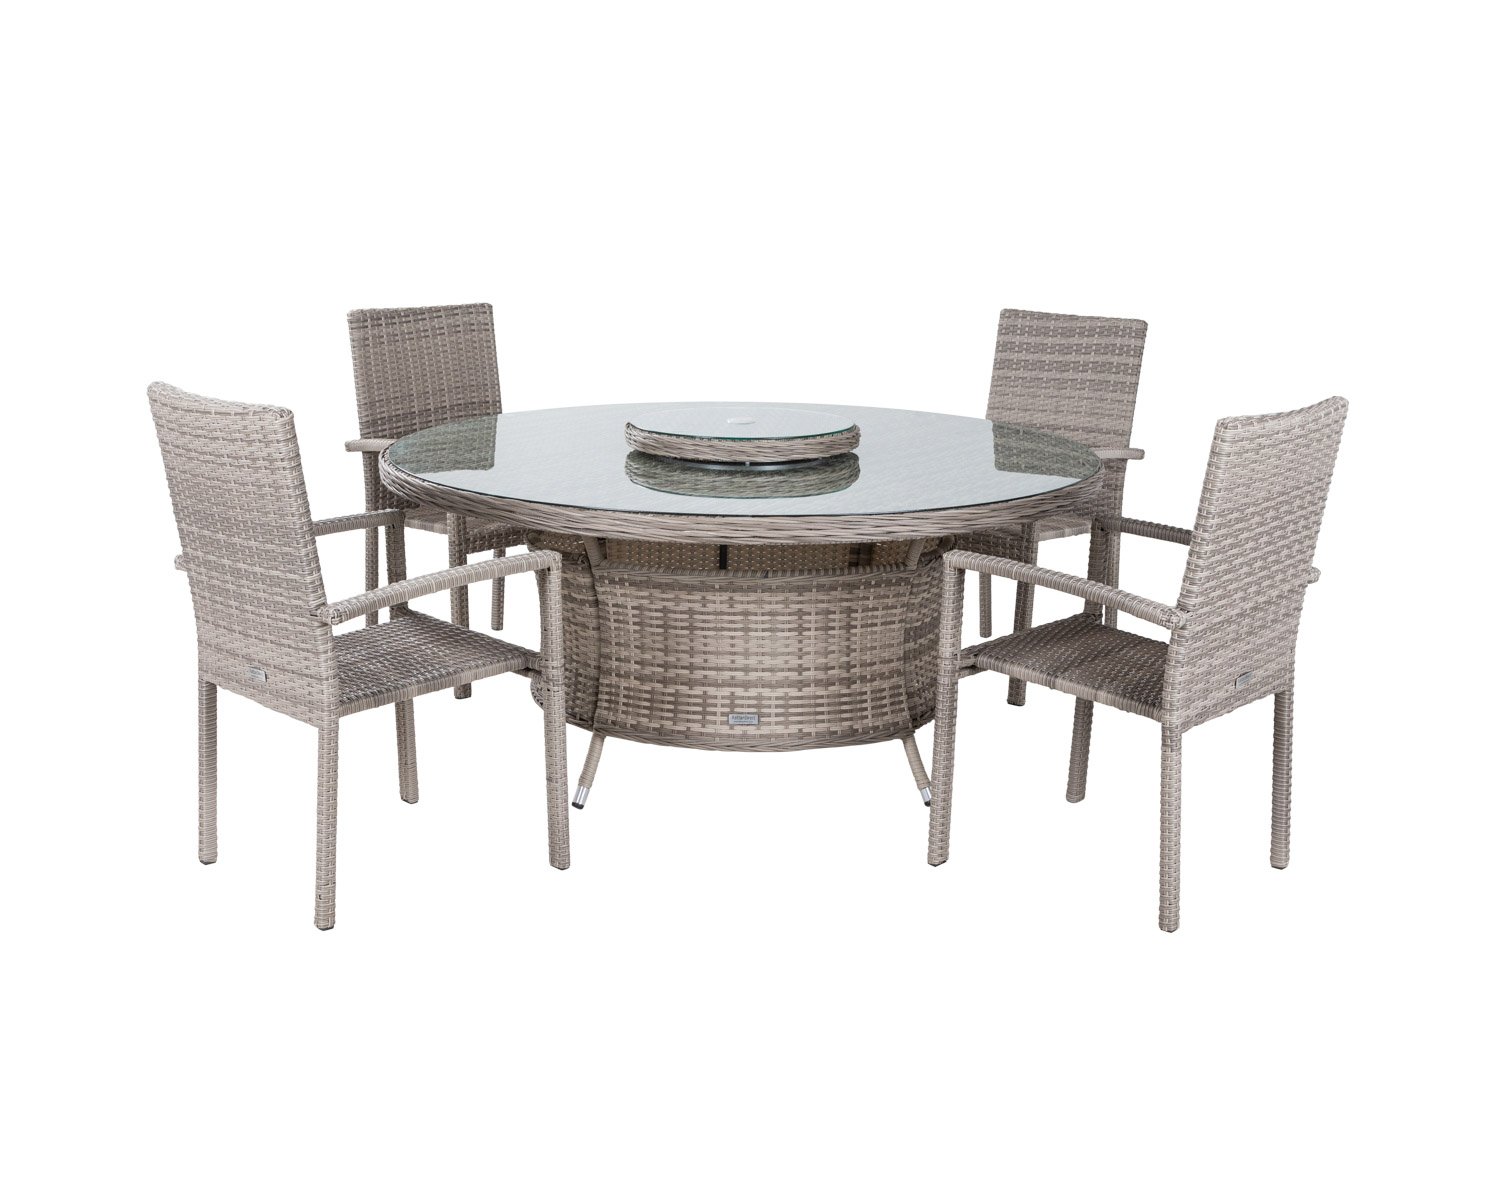 4 Seat Rattan Garden Dining Set With Large Round Dining Table In Grey Rio Rattan Direct